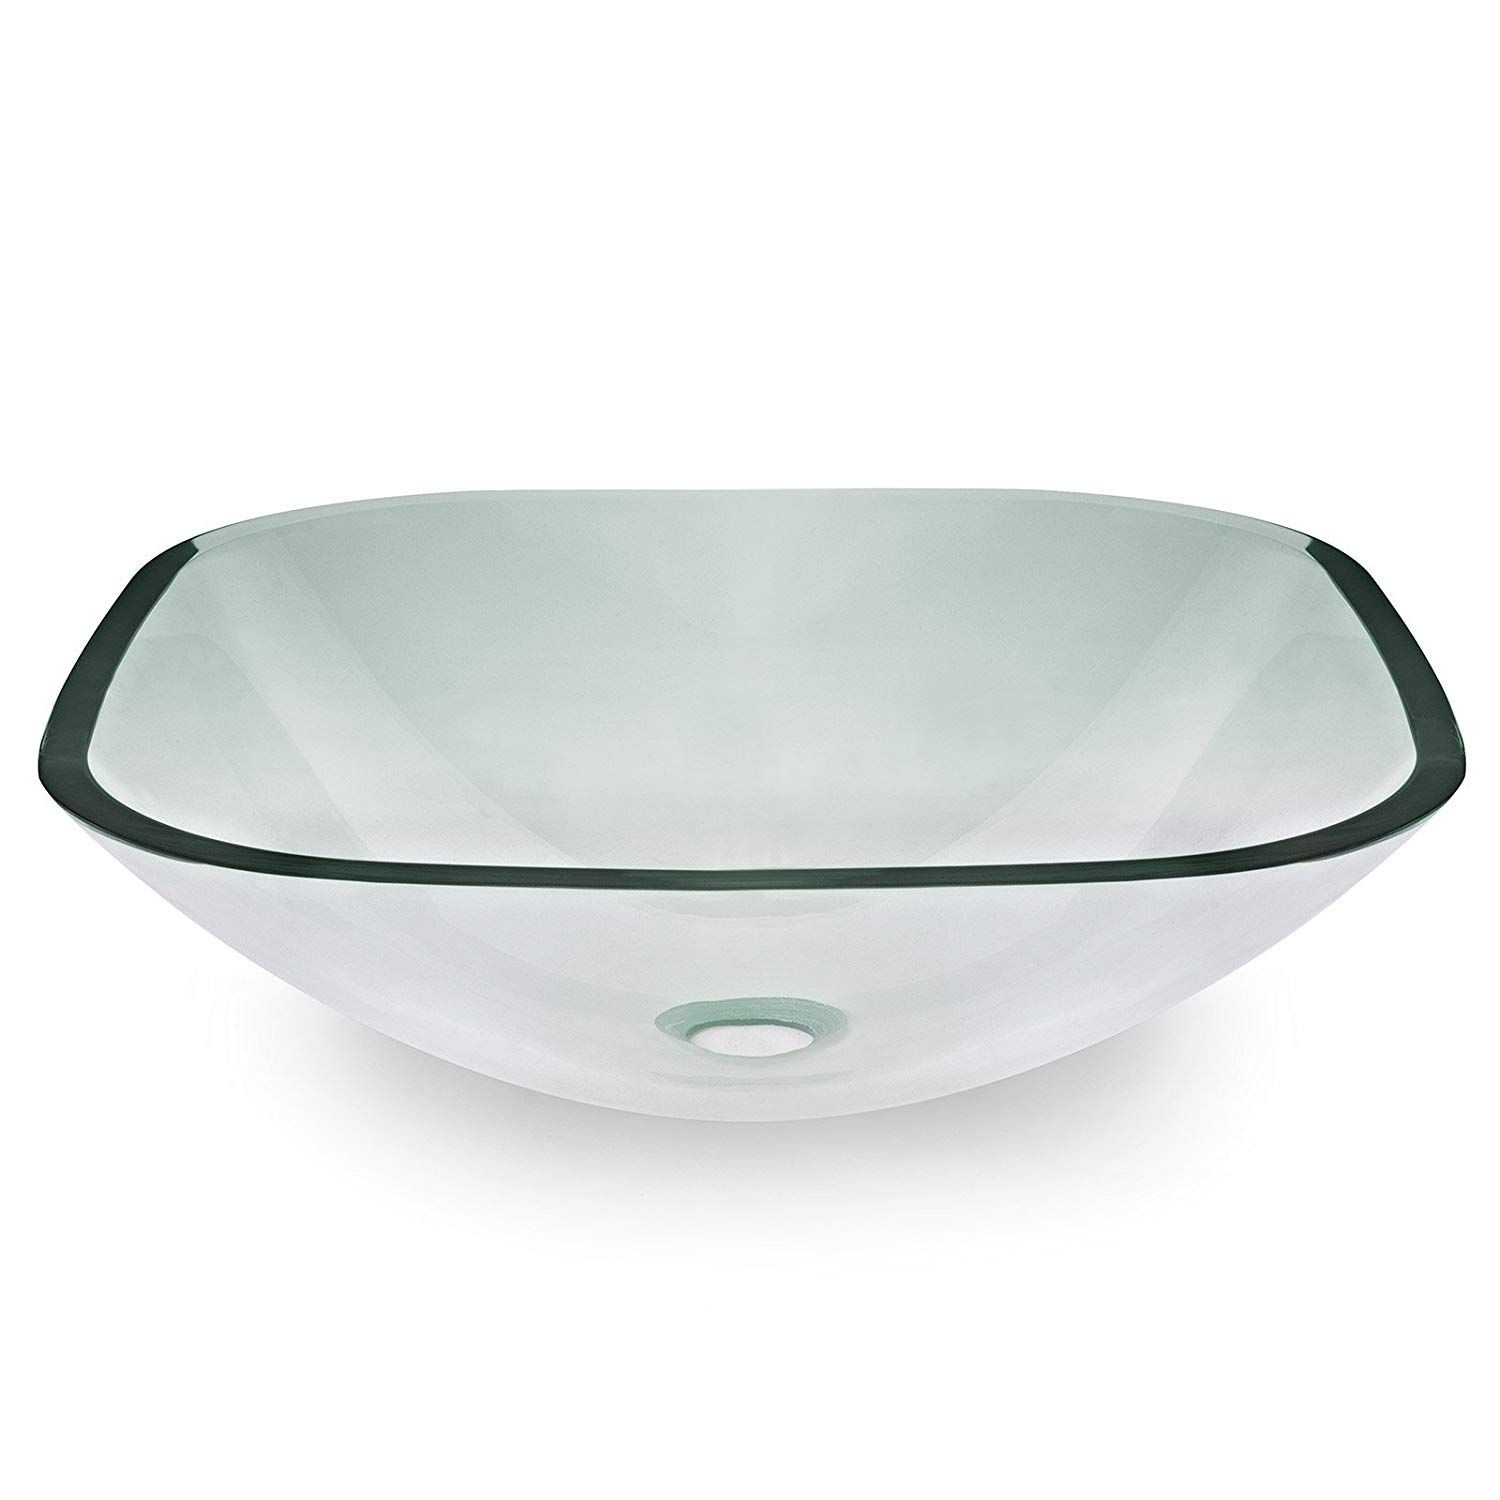 Miligore Modern Glass Vessel Sink Above Counter Bathroom Vanity Basin Bowl Square Clear